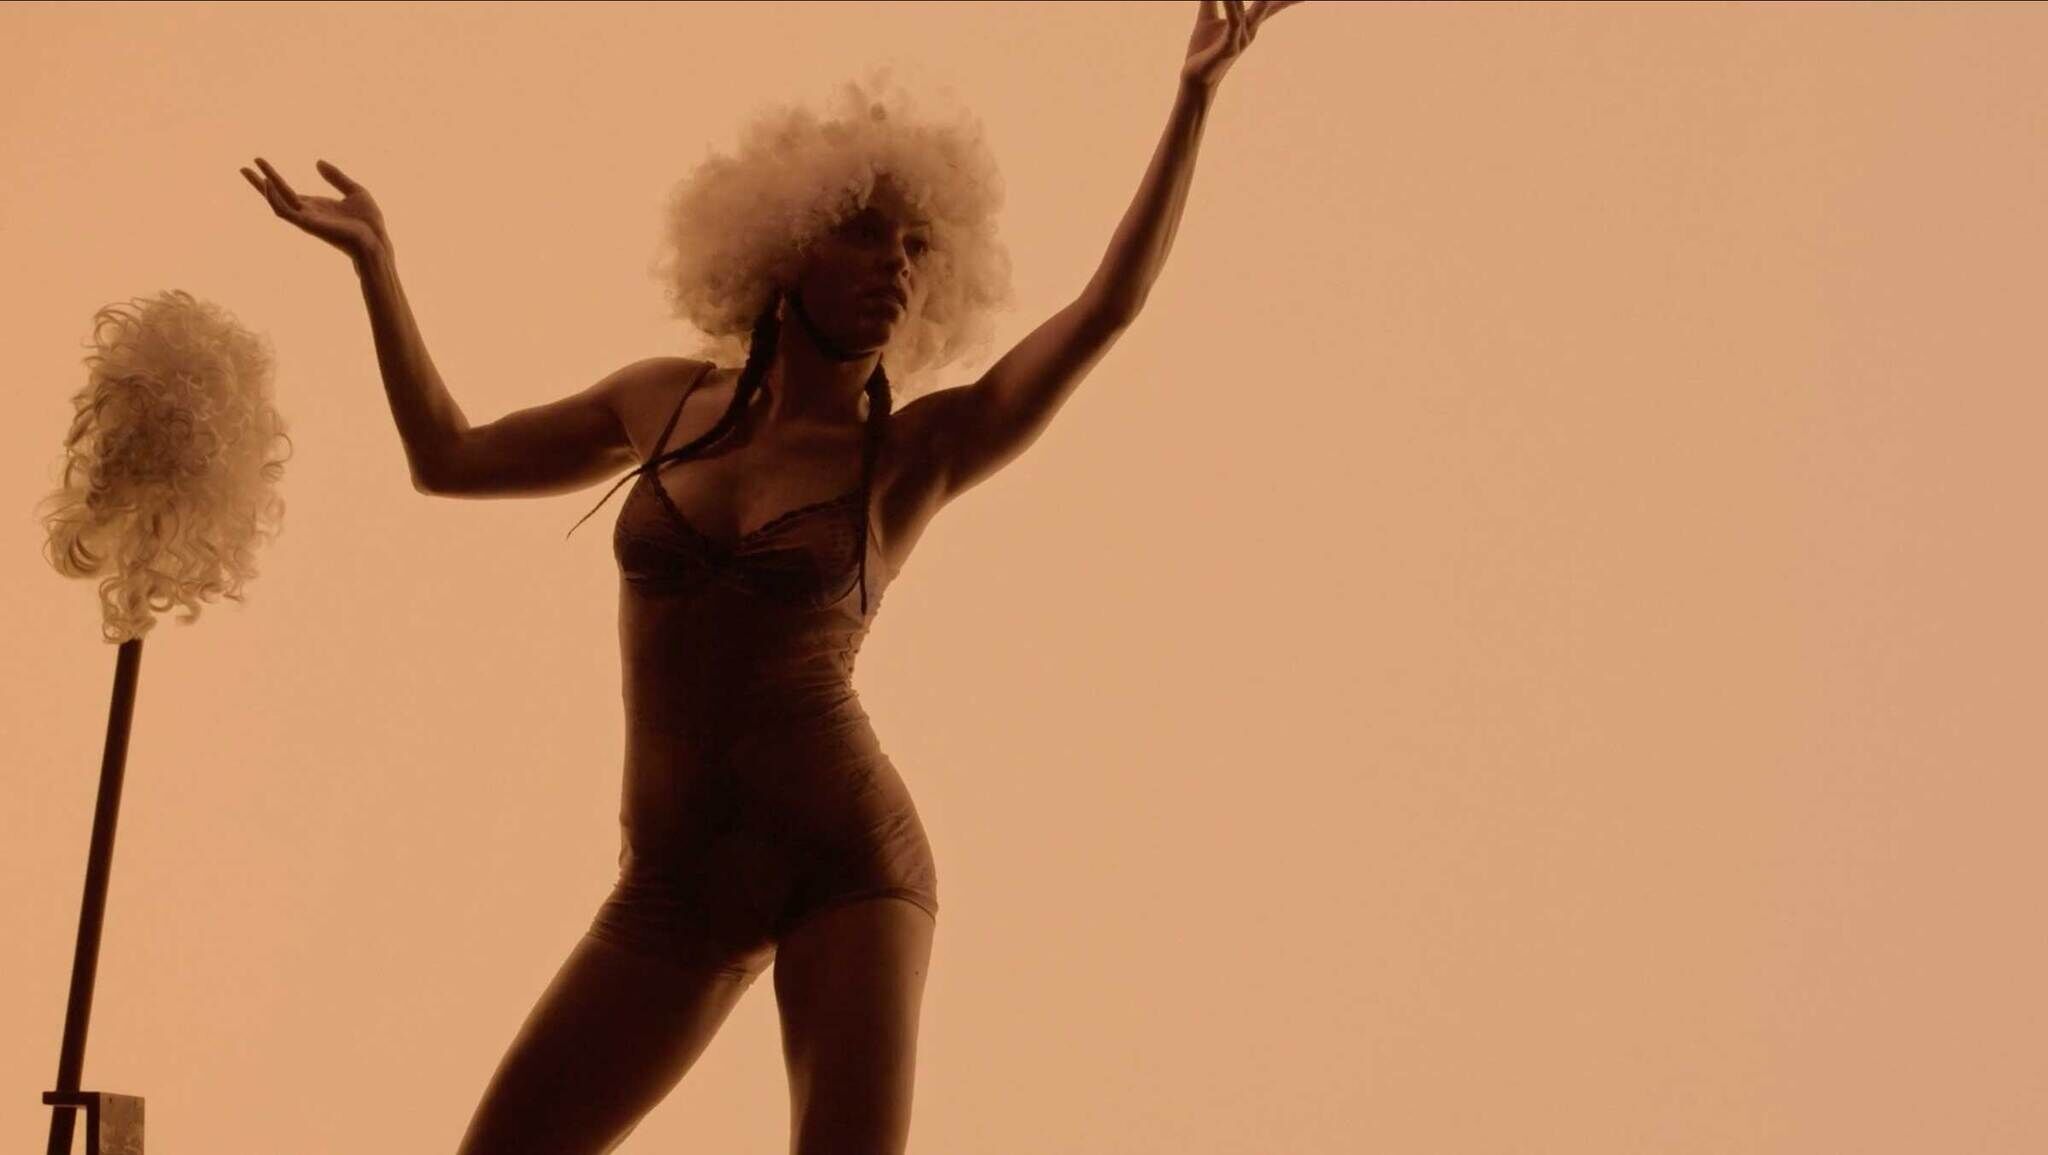 Silhouette of a person with an afro dancing next to a wig on a stand, all cast in a warm, orange hue.